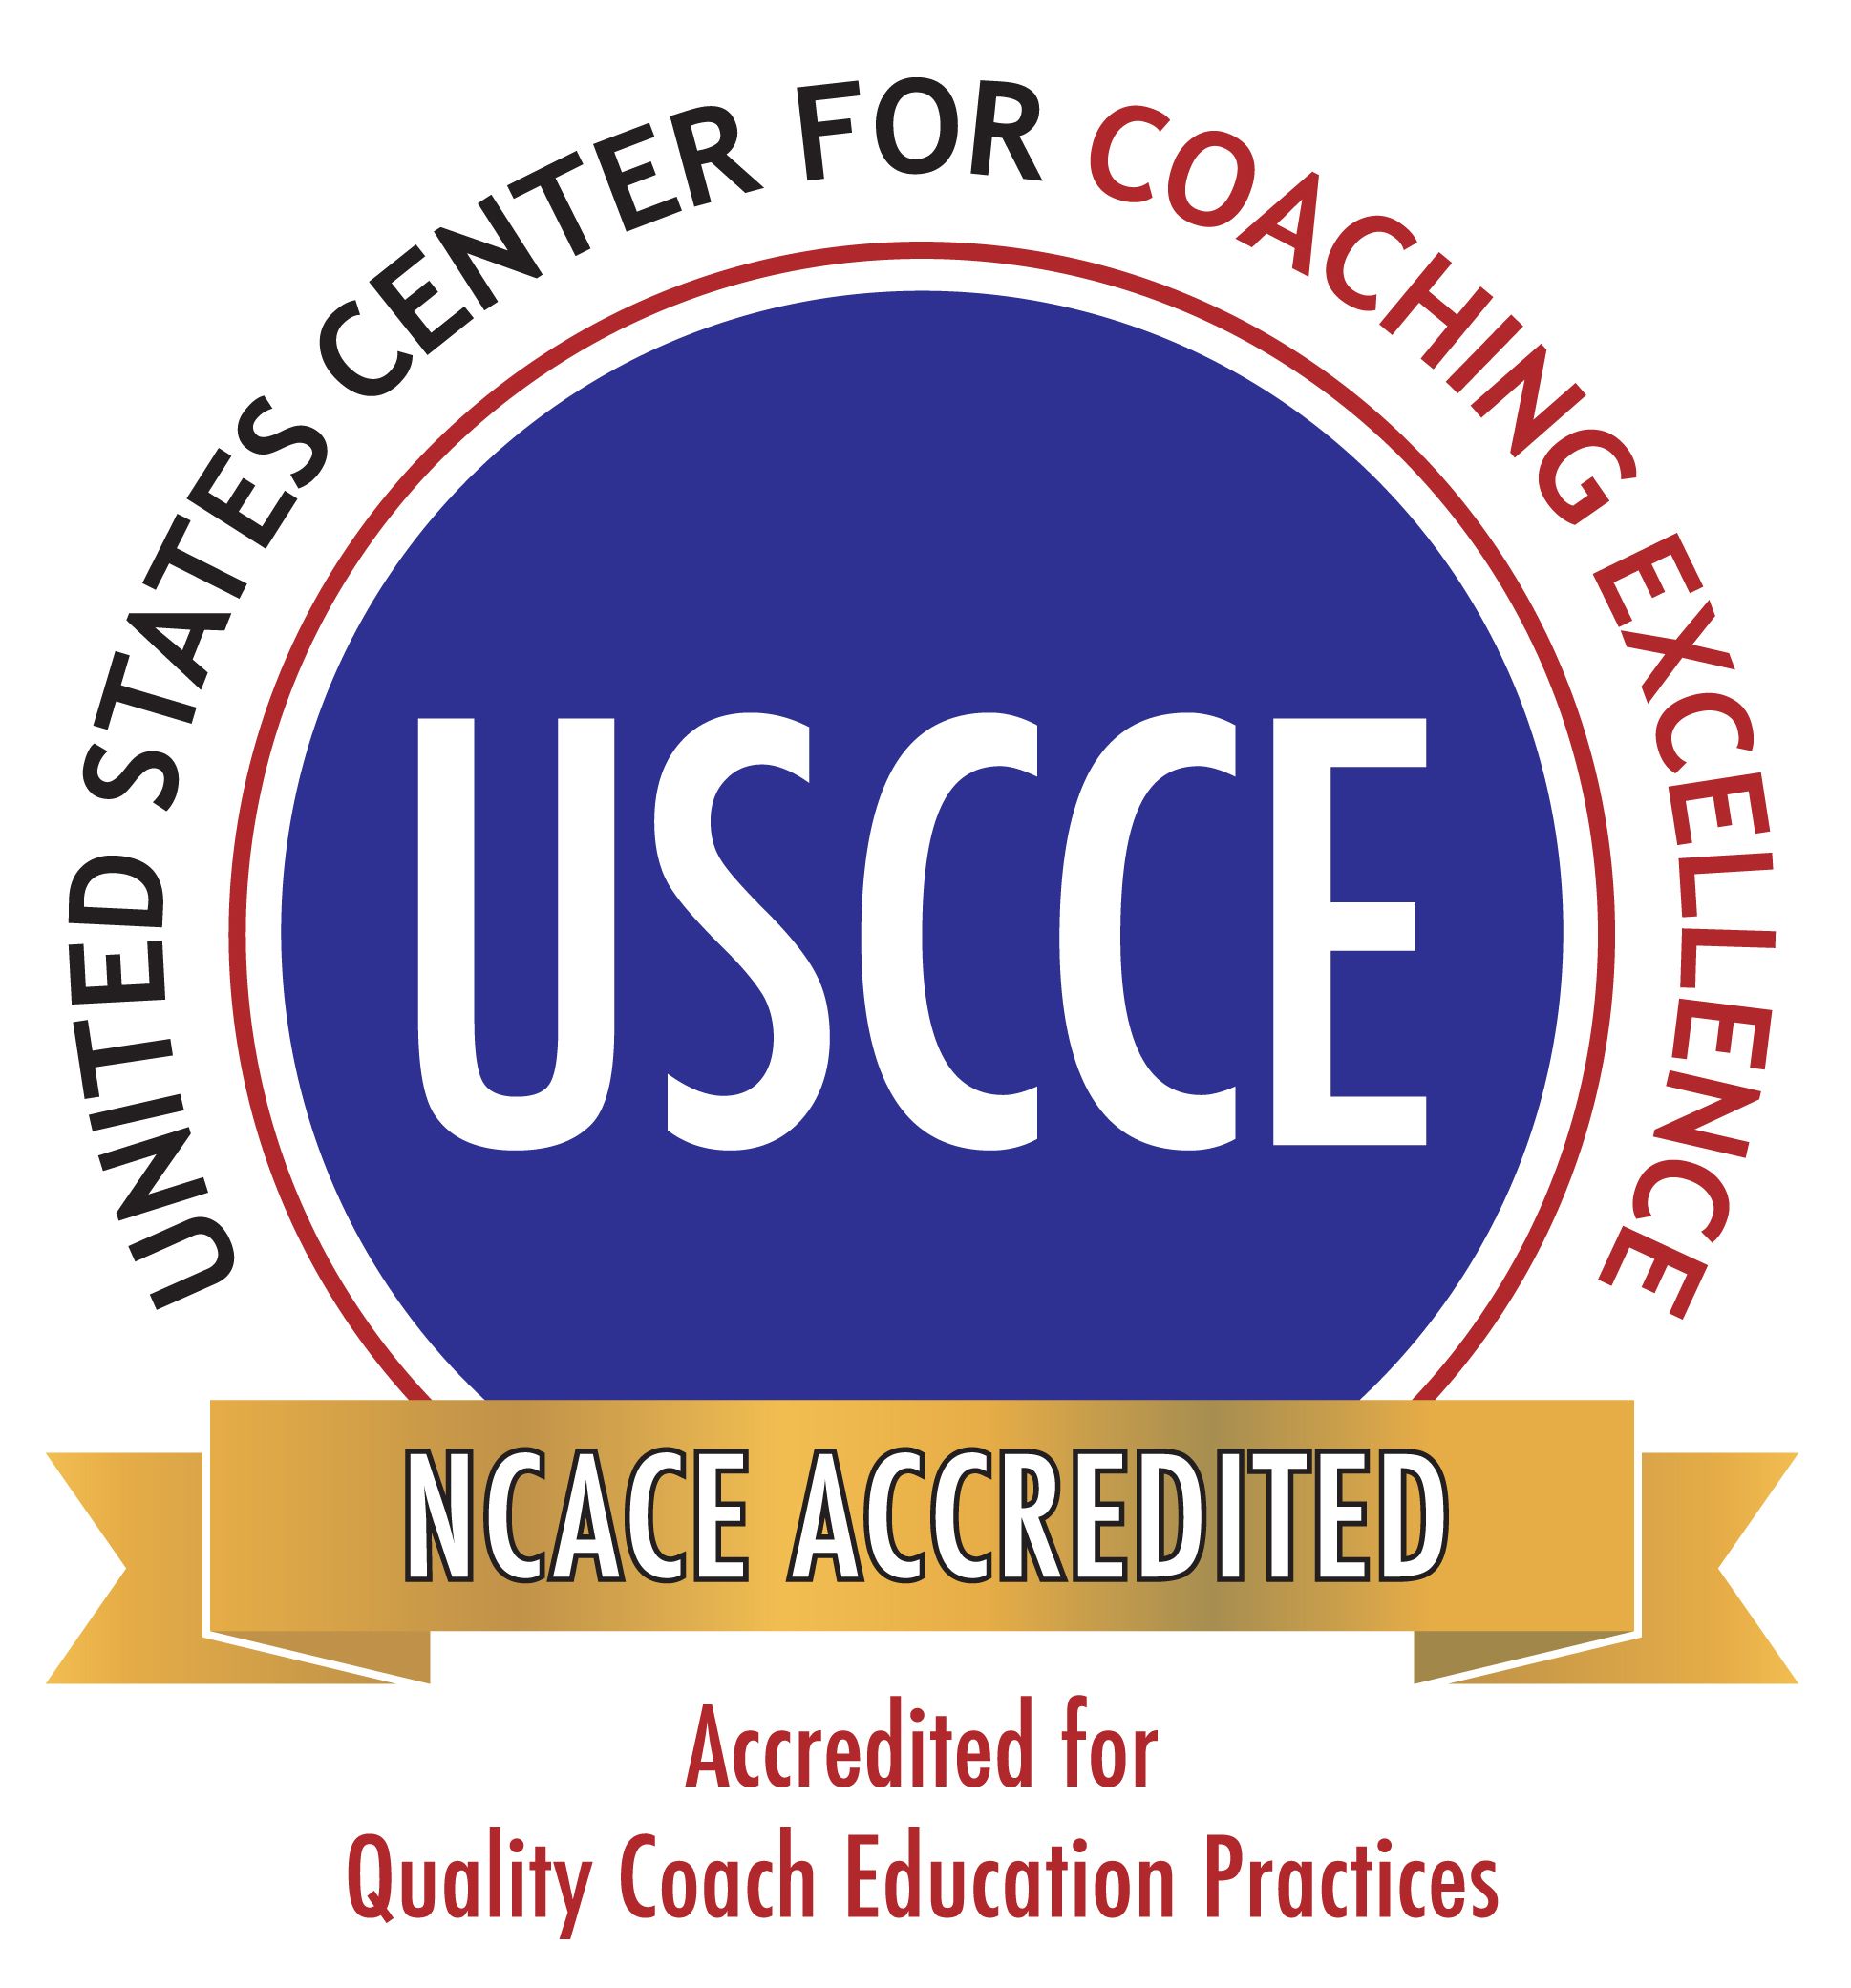 NCACE Accredited 2021